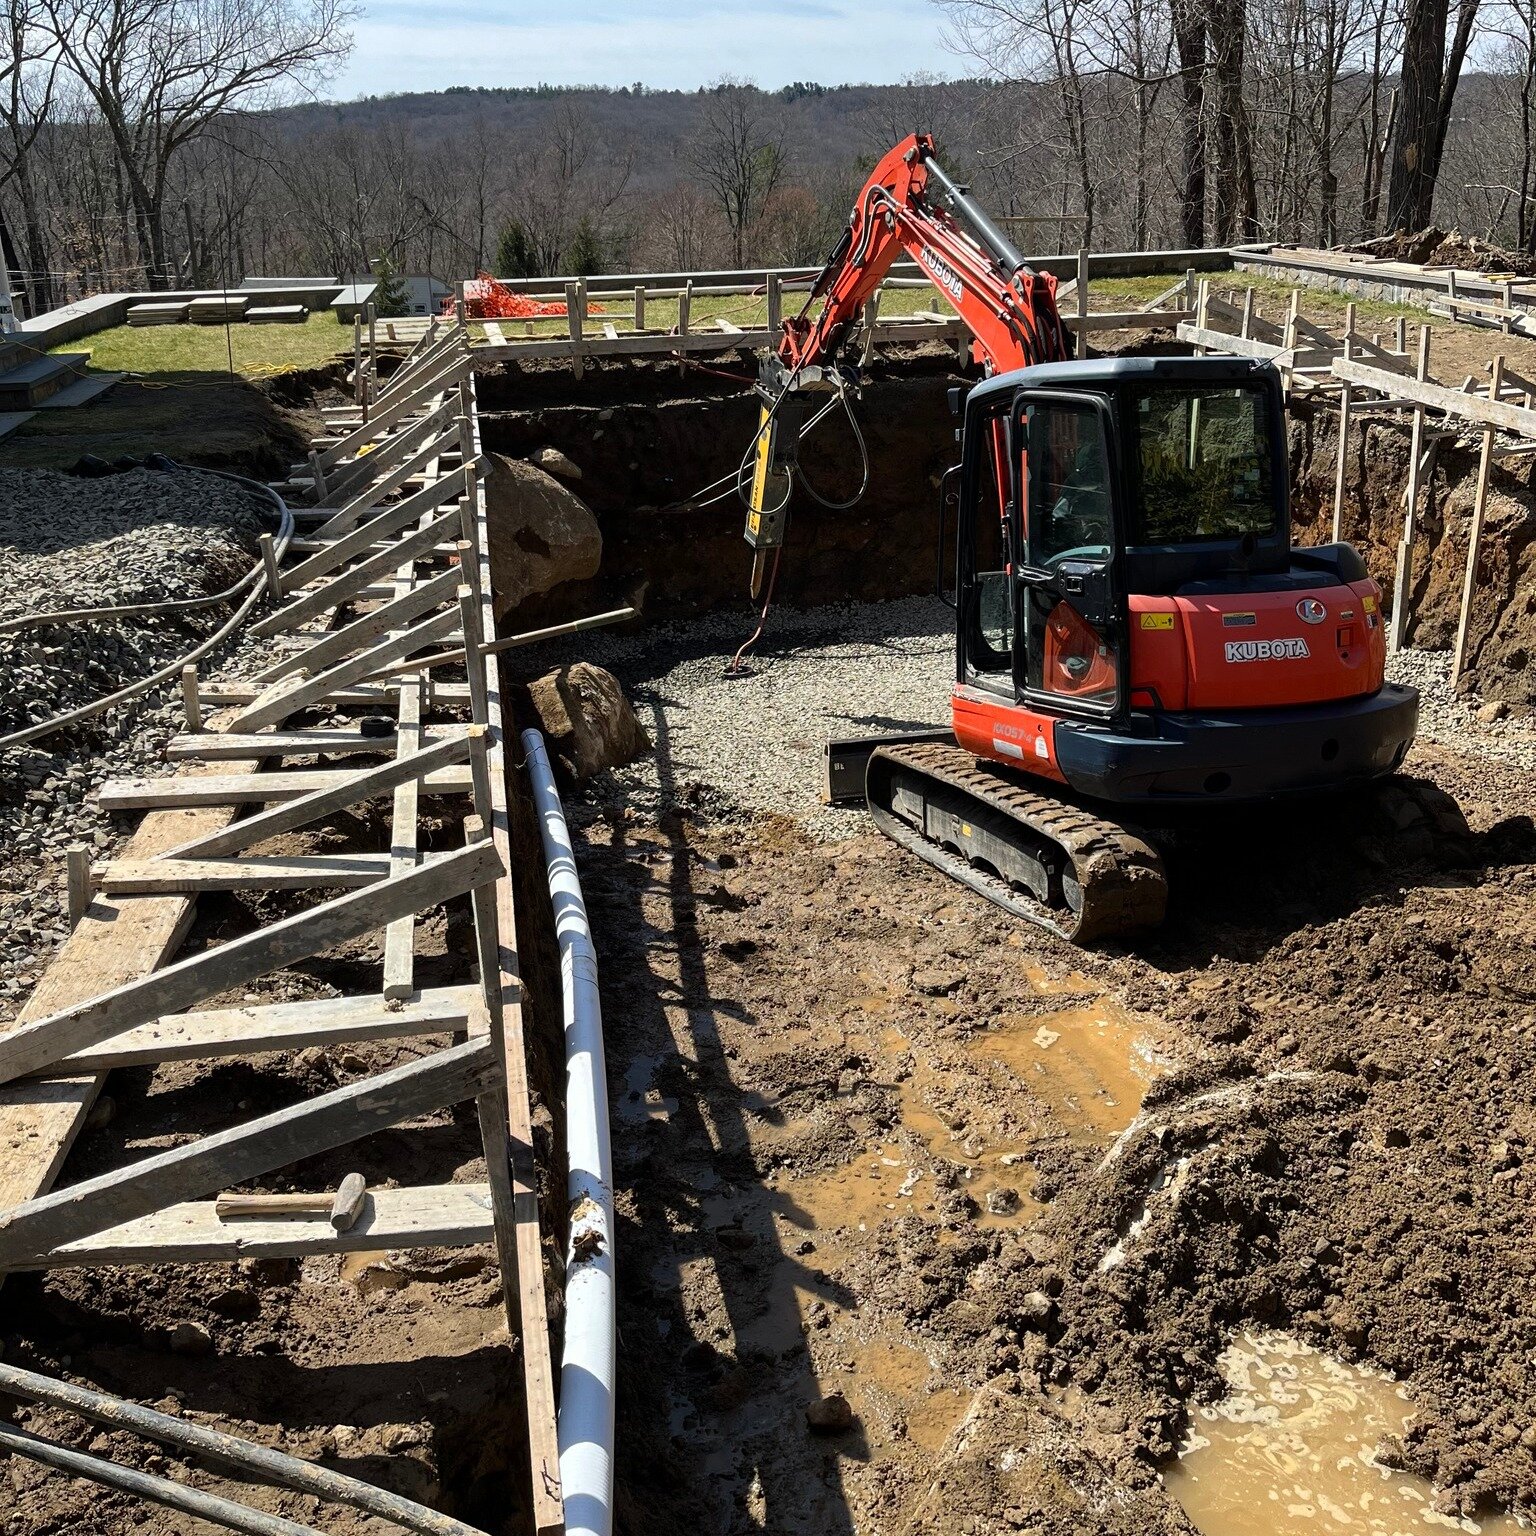 Let the spring projects begin! 
&bull;
#poolcontractor #connecticut #buildingpools #fairfieldcountyct #westchestercounty